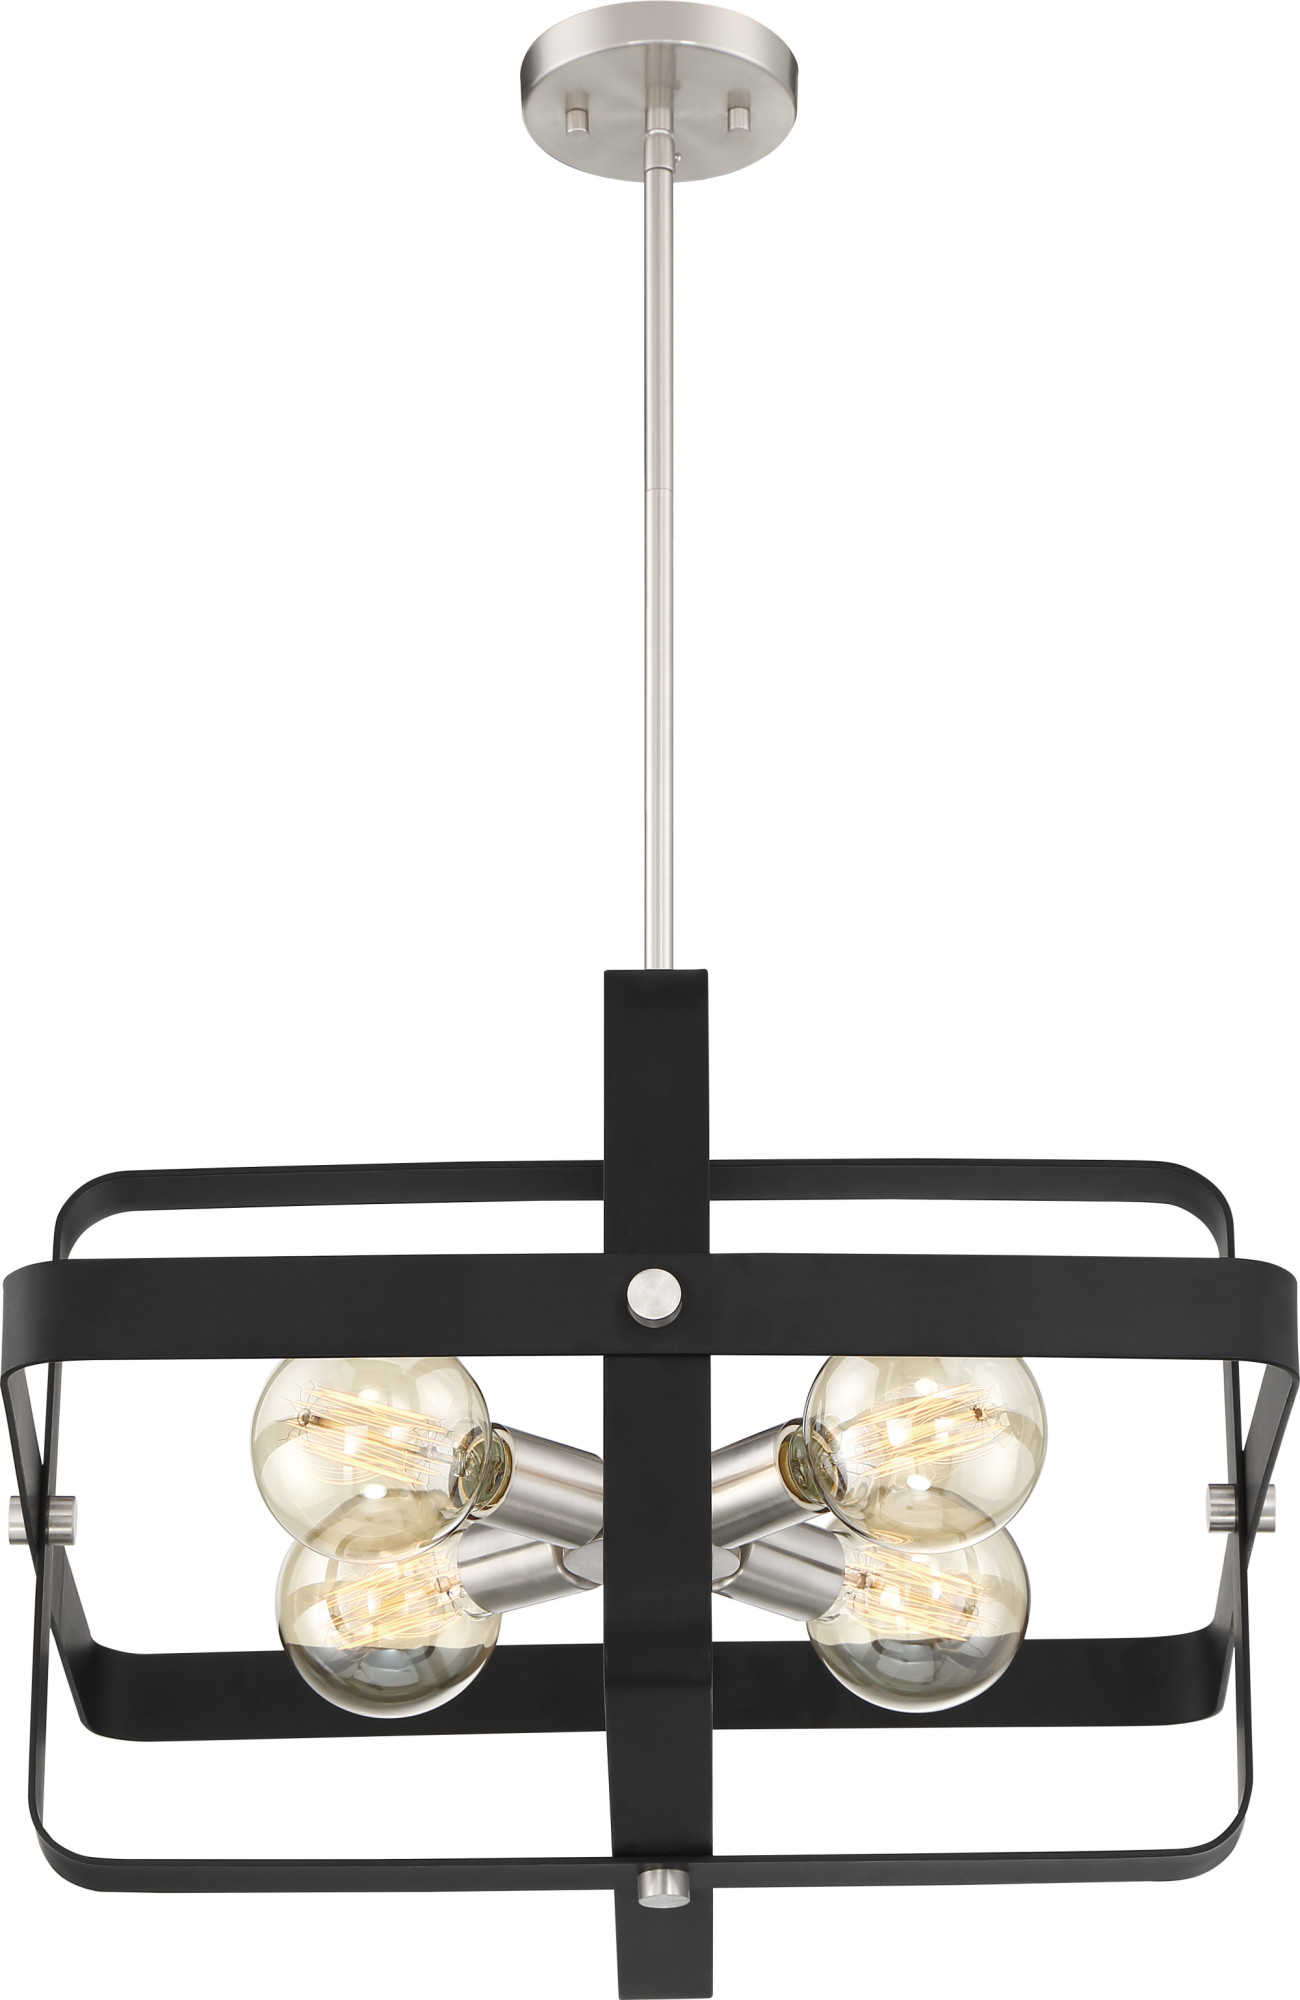 60/6722-Nuvo Lighting-Prana-4 Light Pendant-20 Inches Wide by 12 Inches High-White Finish - image 5 of 7